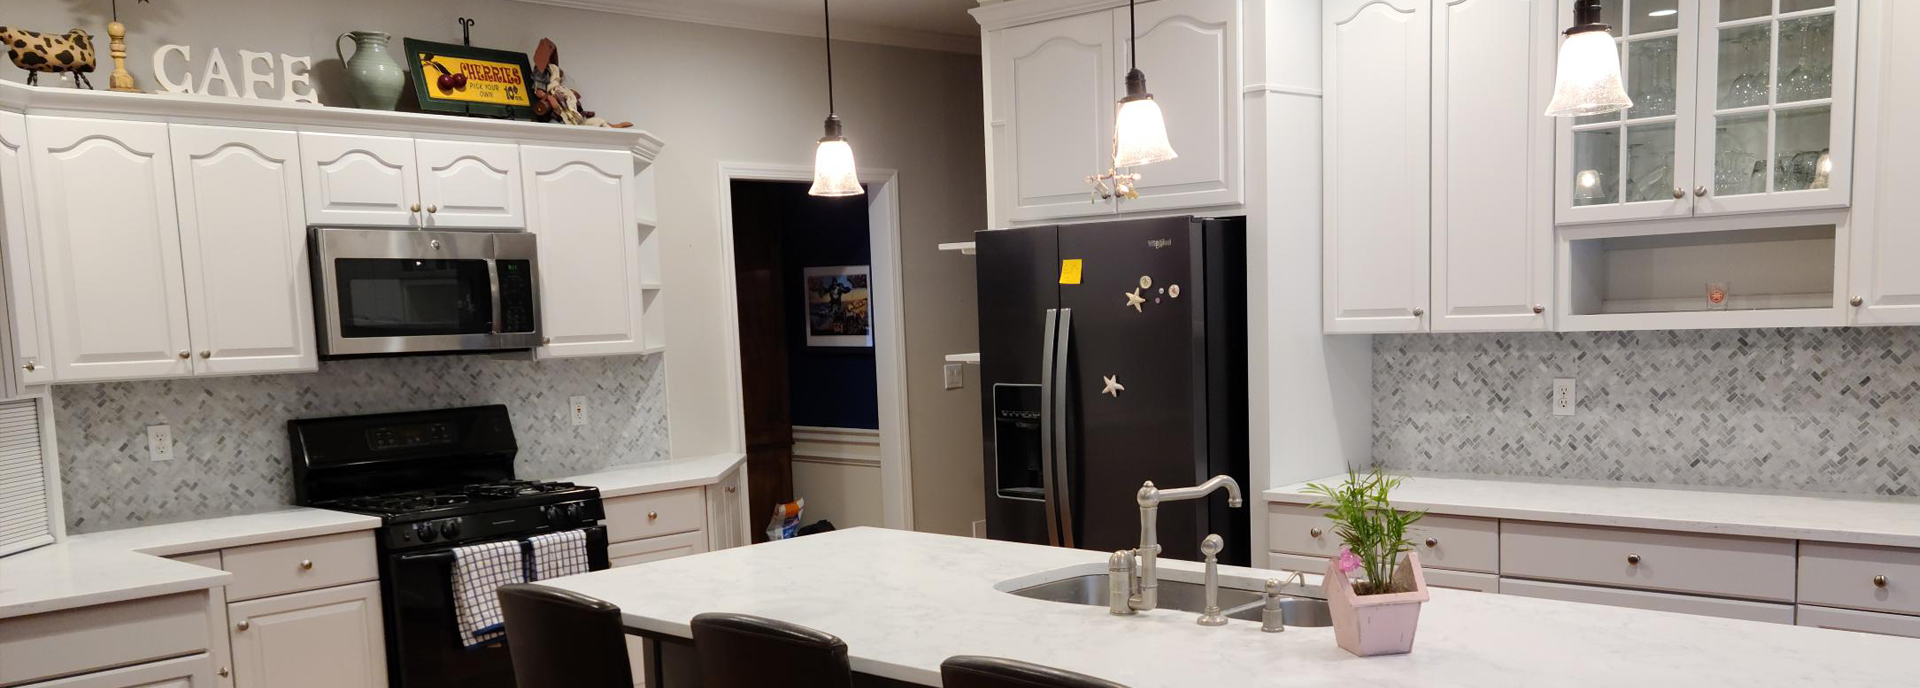 Kitchen Cabinets After Somers, NY